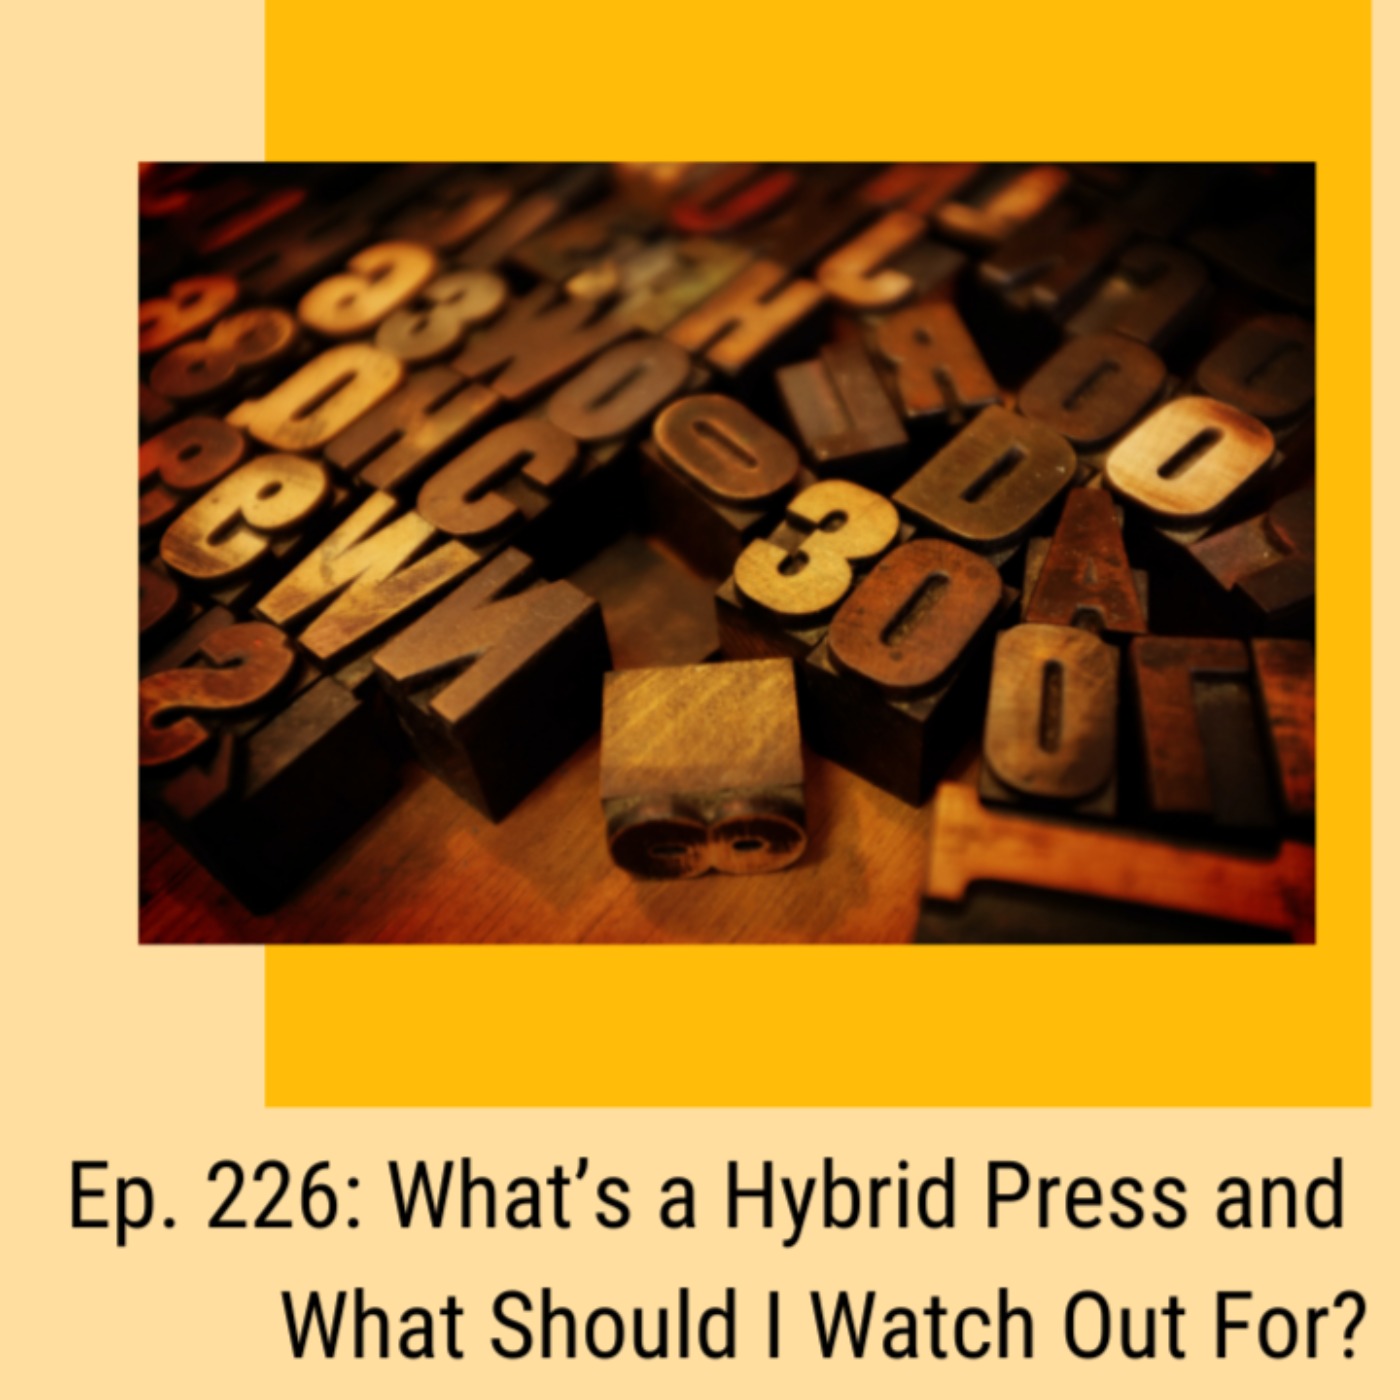 Ep. 226: What’s a Hybrid Press and What Should I Watch Out For?